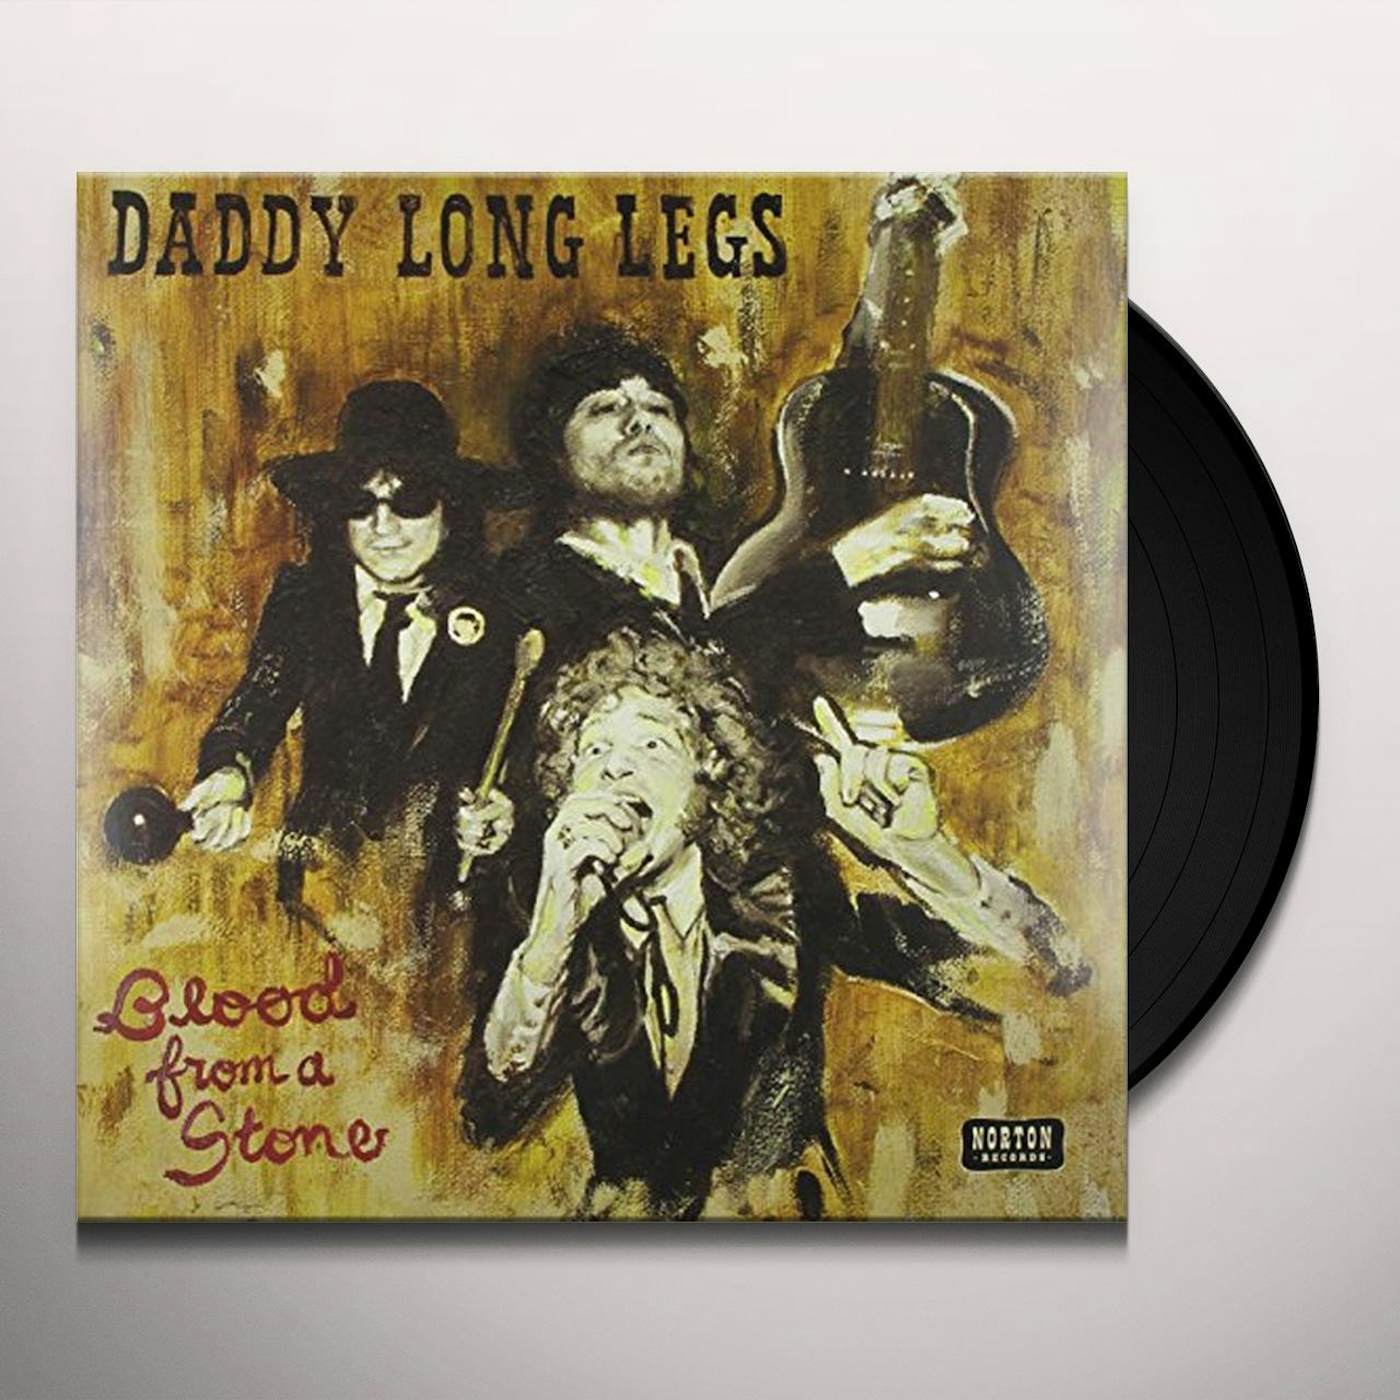 DADDY LONG LEGS Blood from a Stone Vinyl Record